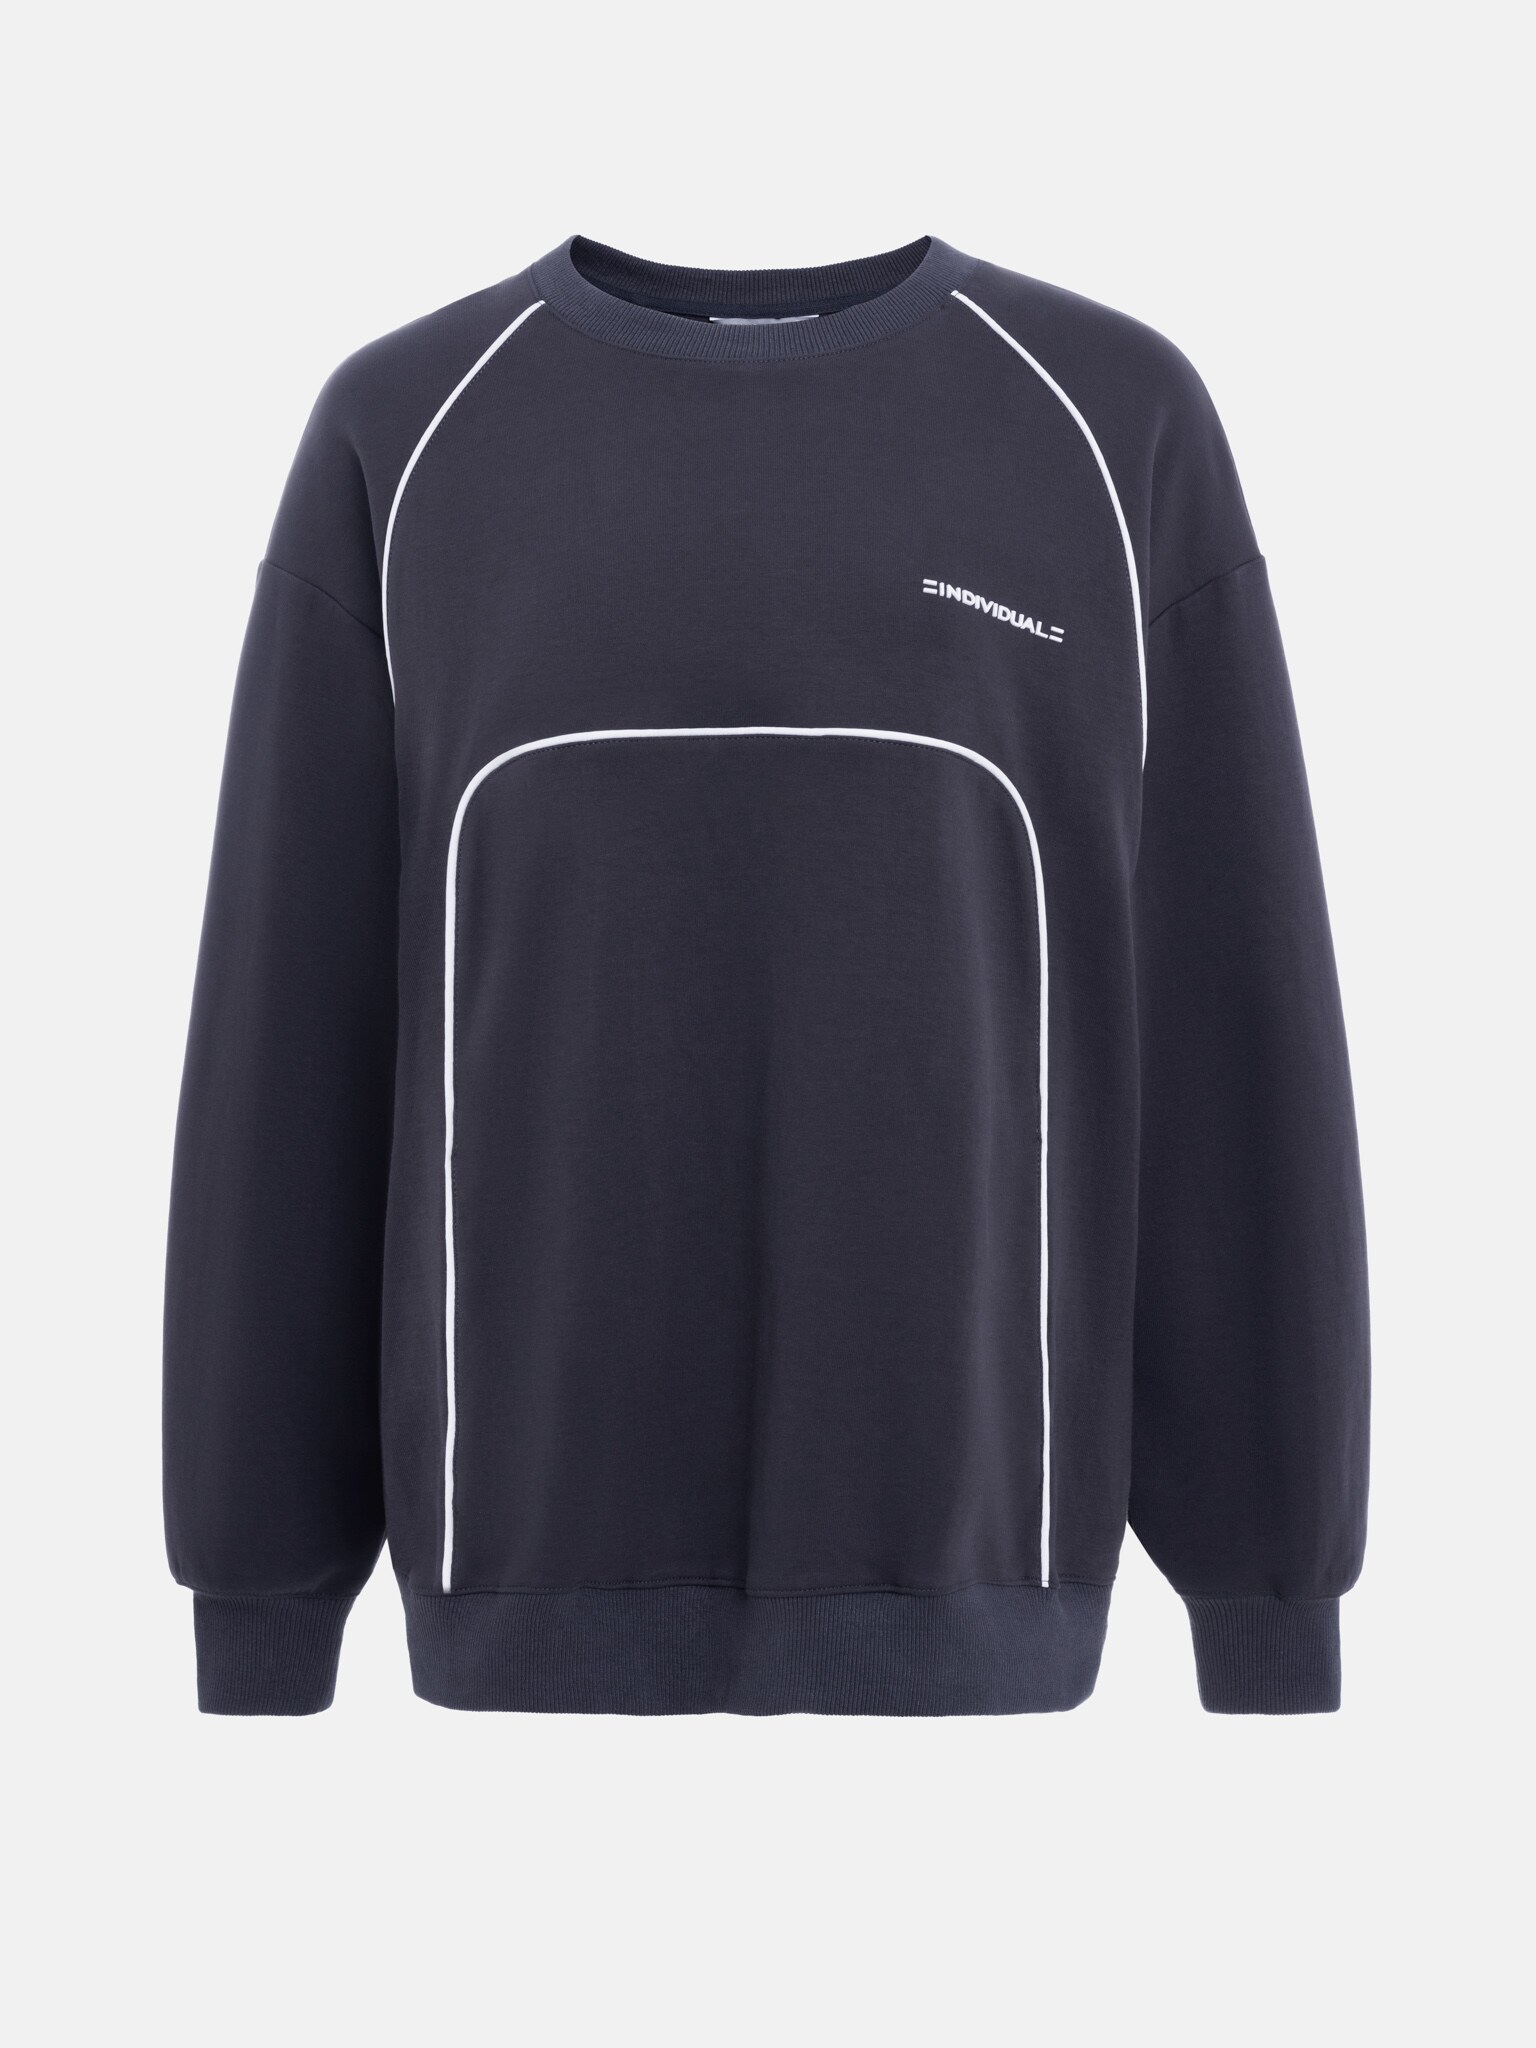 Jersey sweatshirt with contrasting stripes